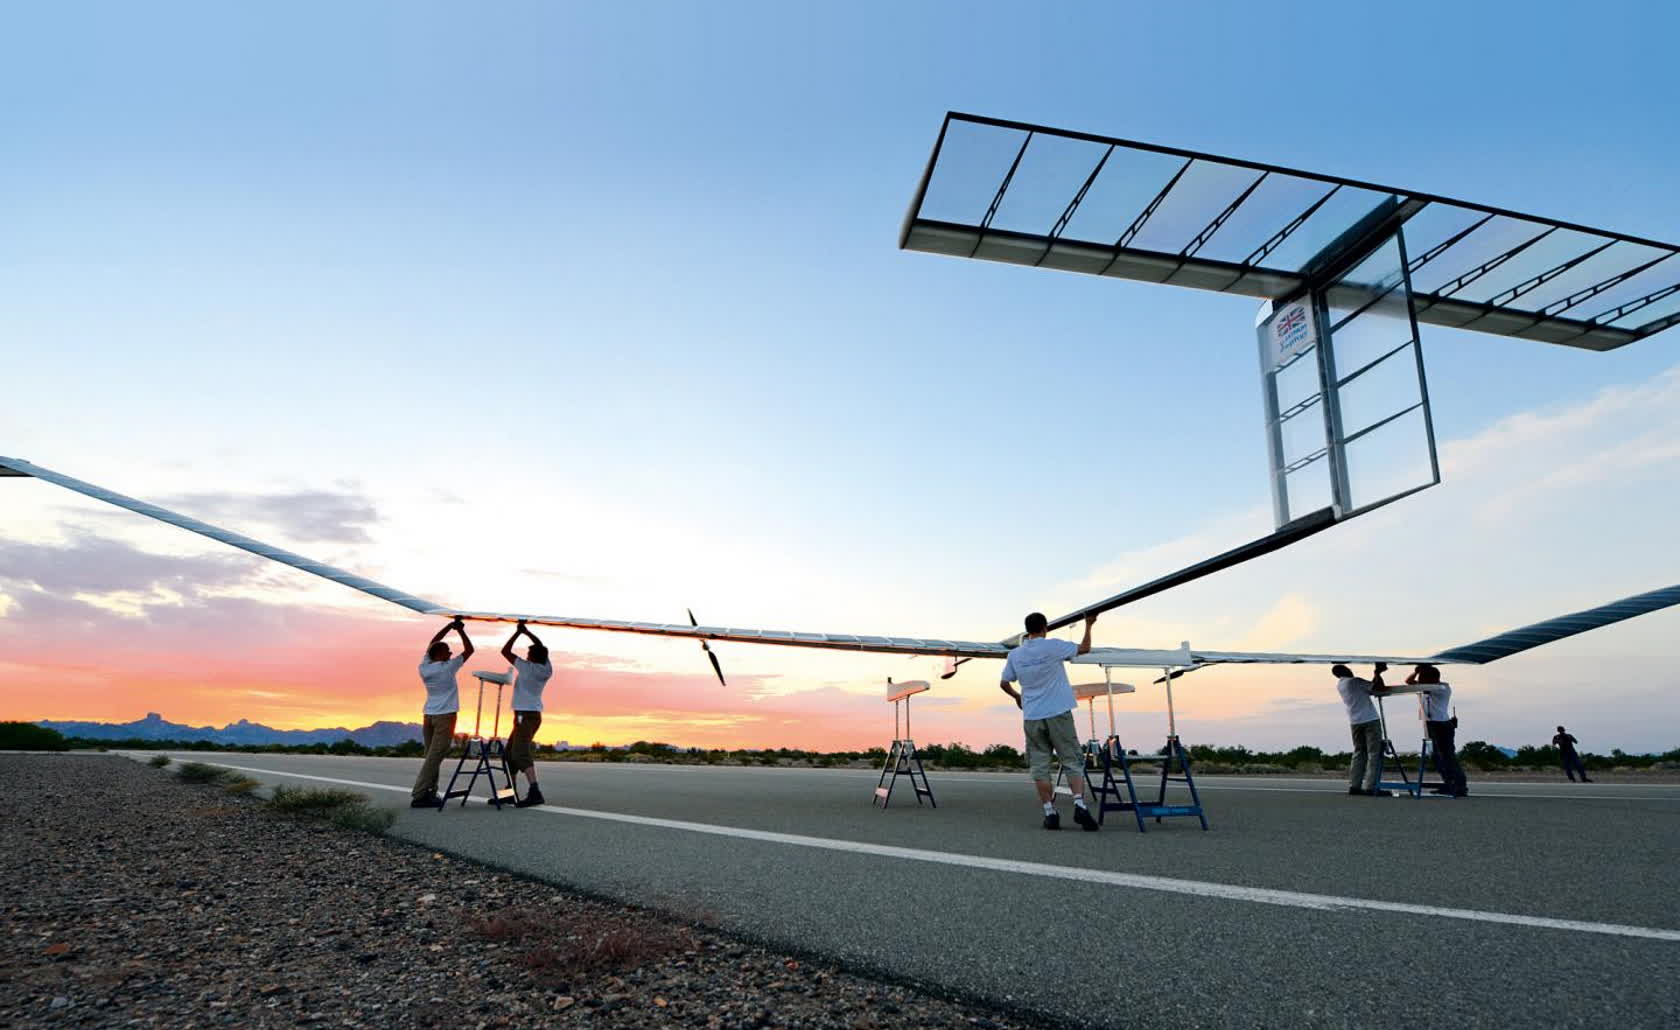 Airbus' solar-powered drone crashes hours before breaking flight endurance record